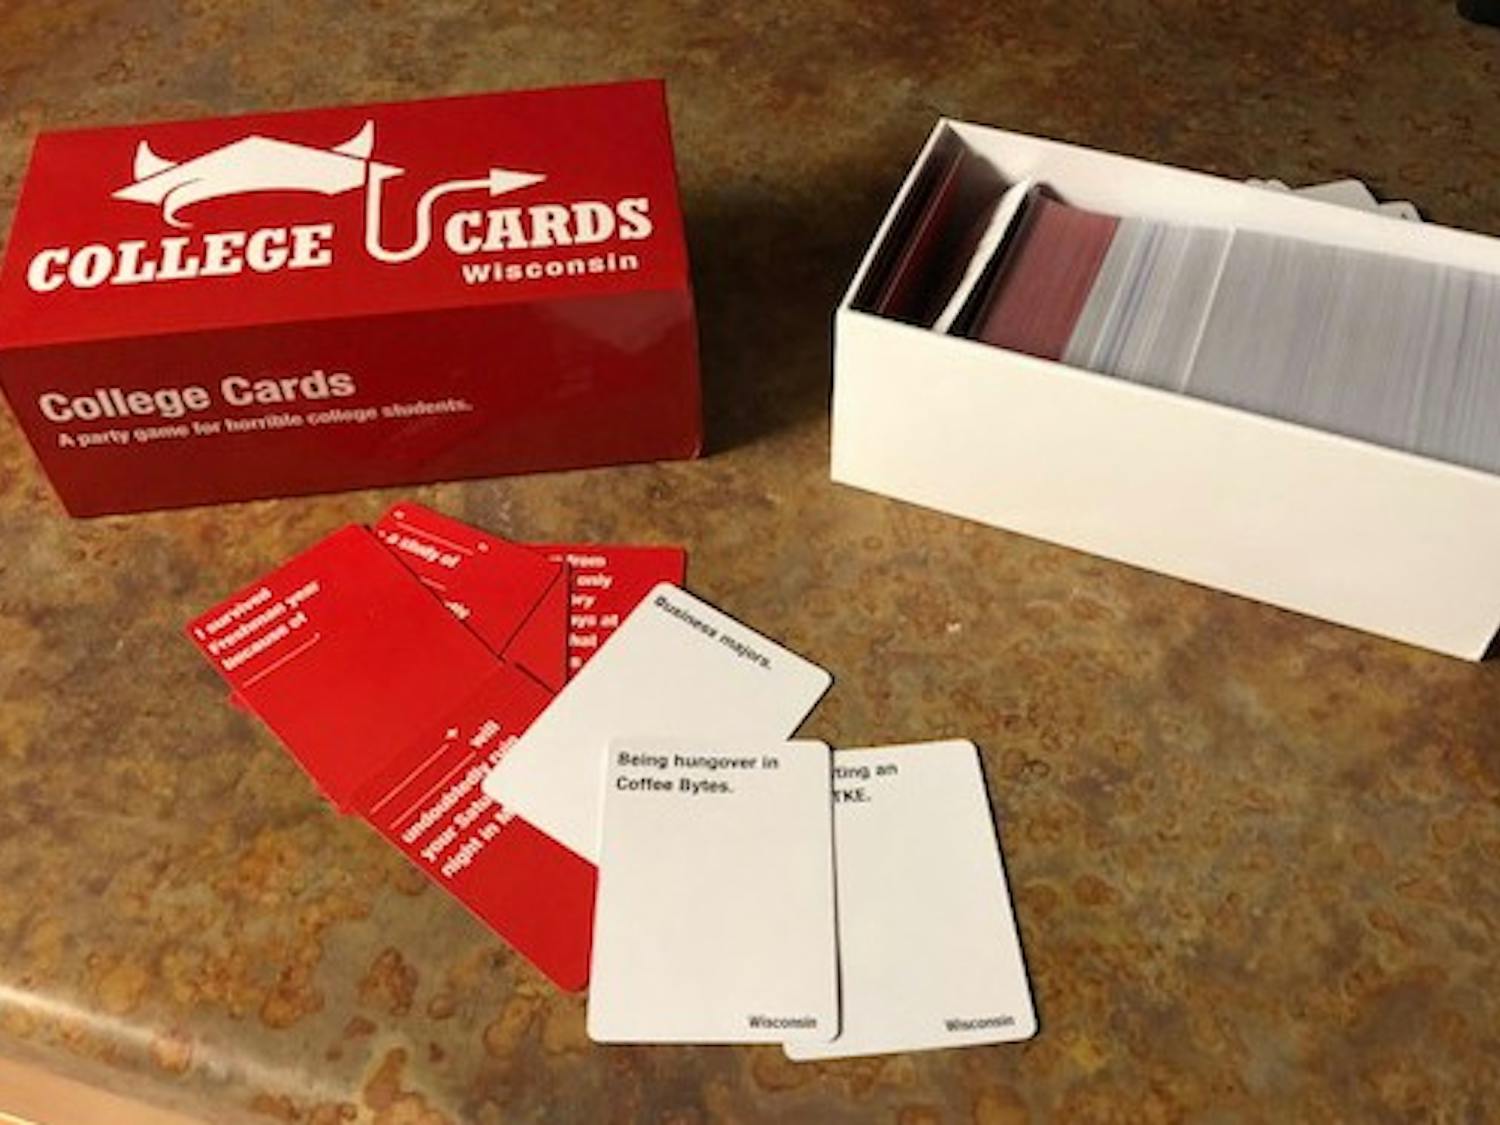 Cards against Wisconsin? College Cards to shut down production